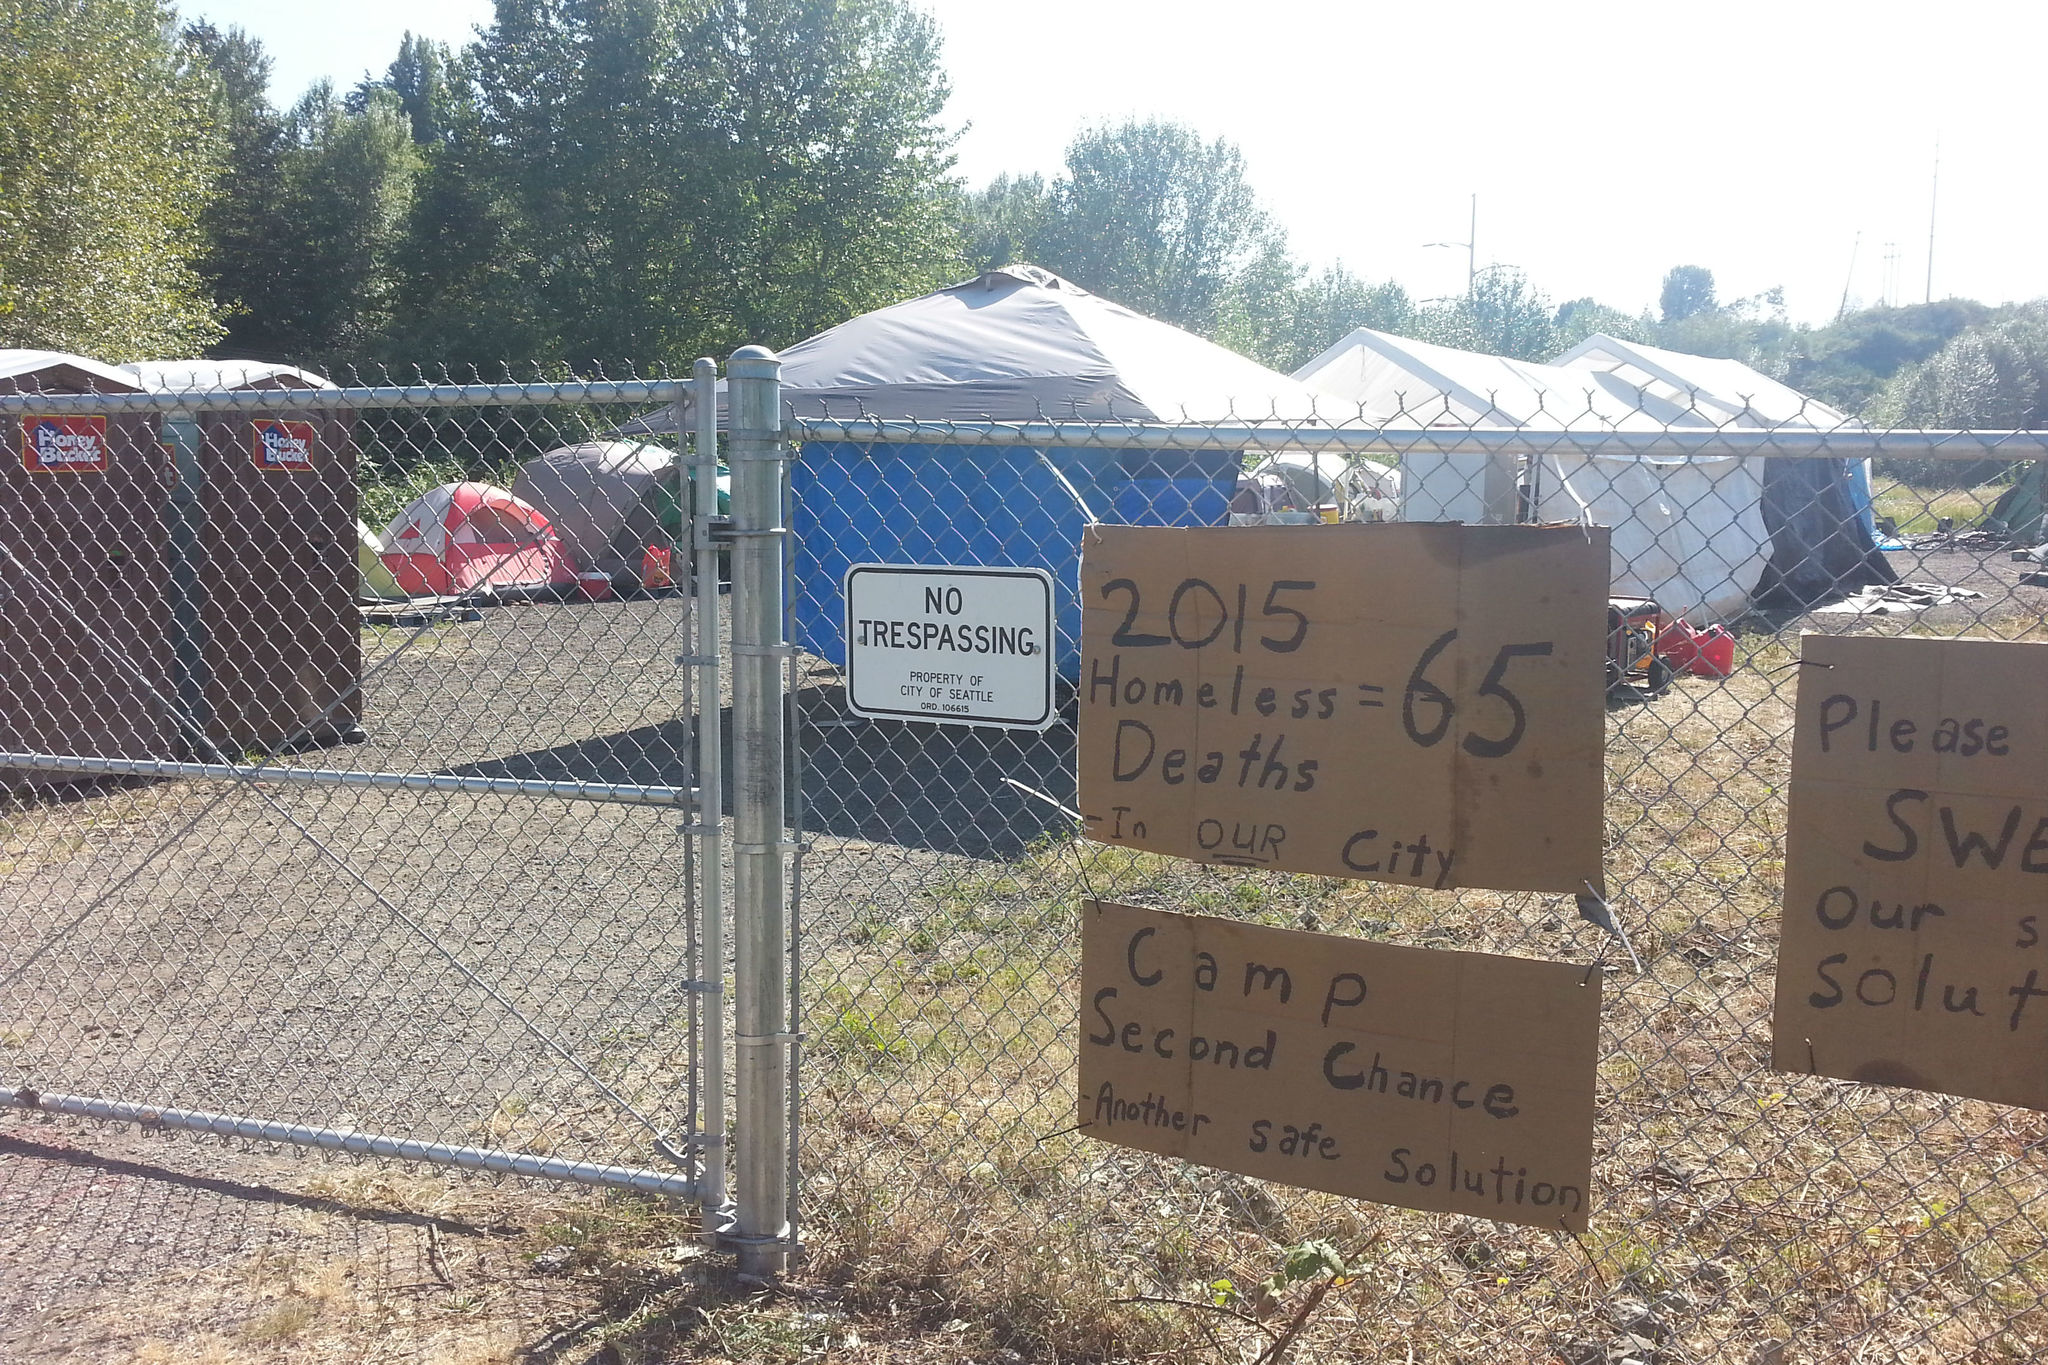 City and County Councilmembers Ask Murray Not to Clear Homeless Encampment